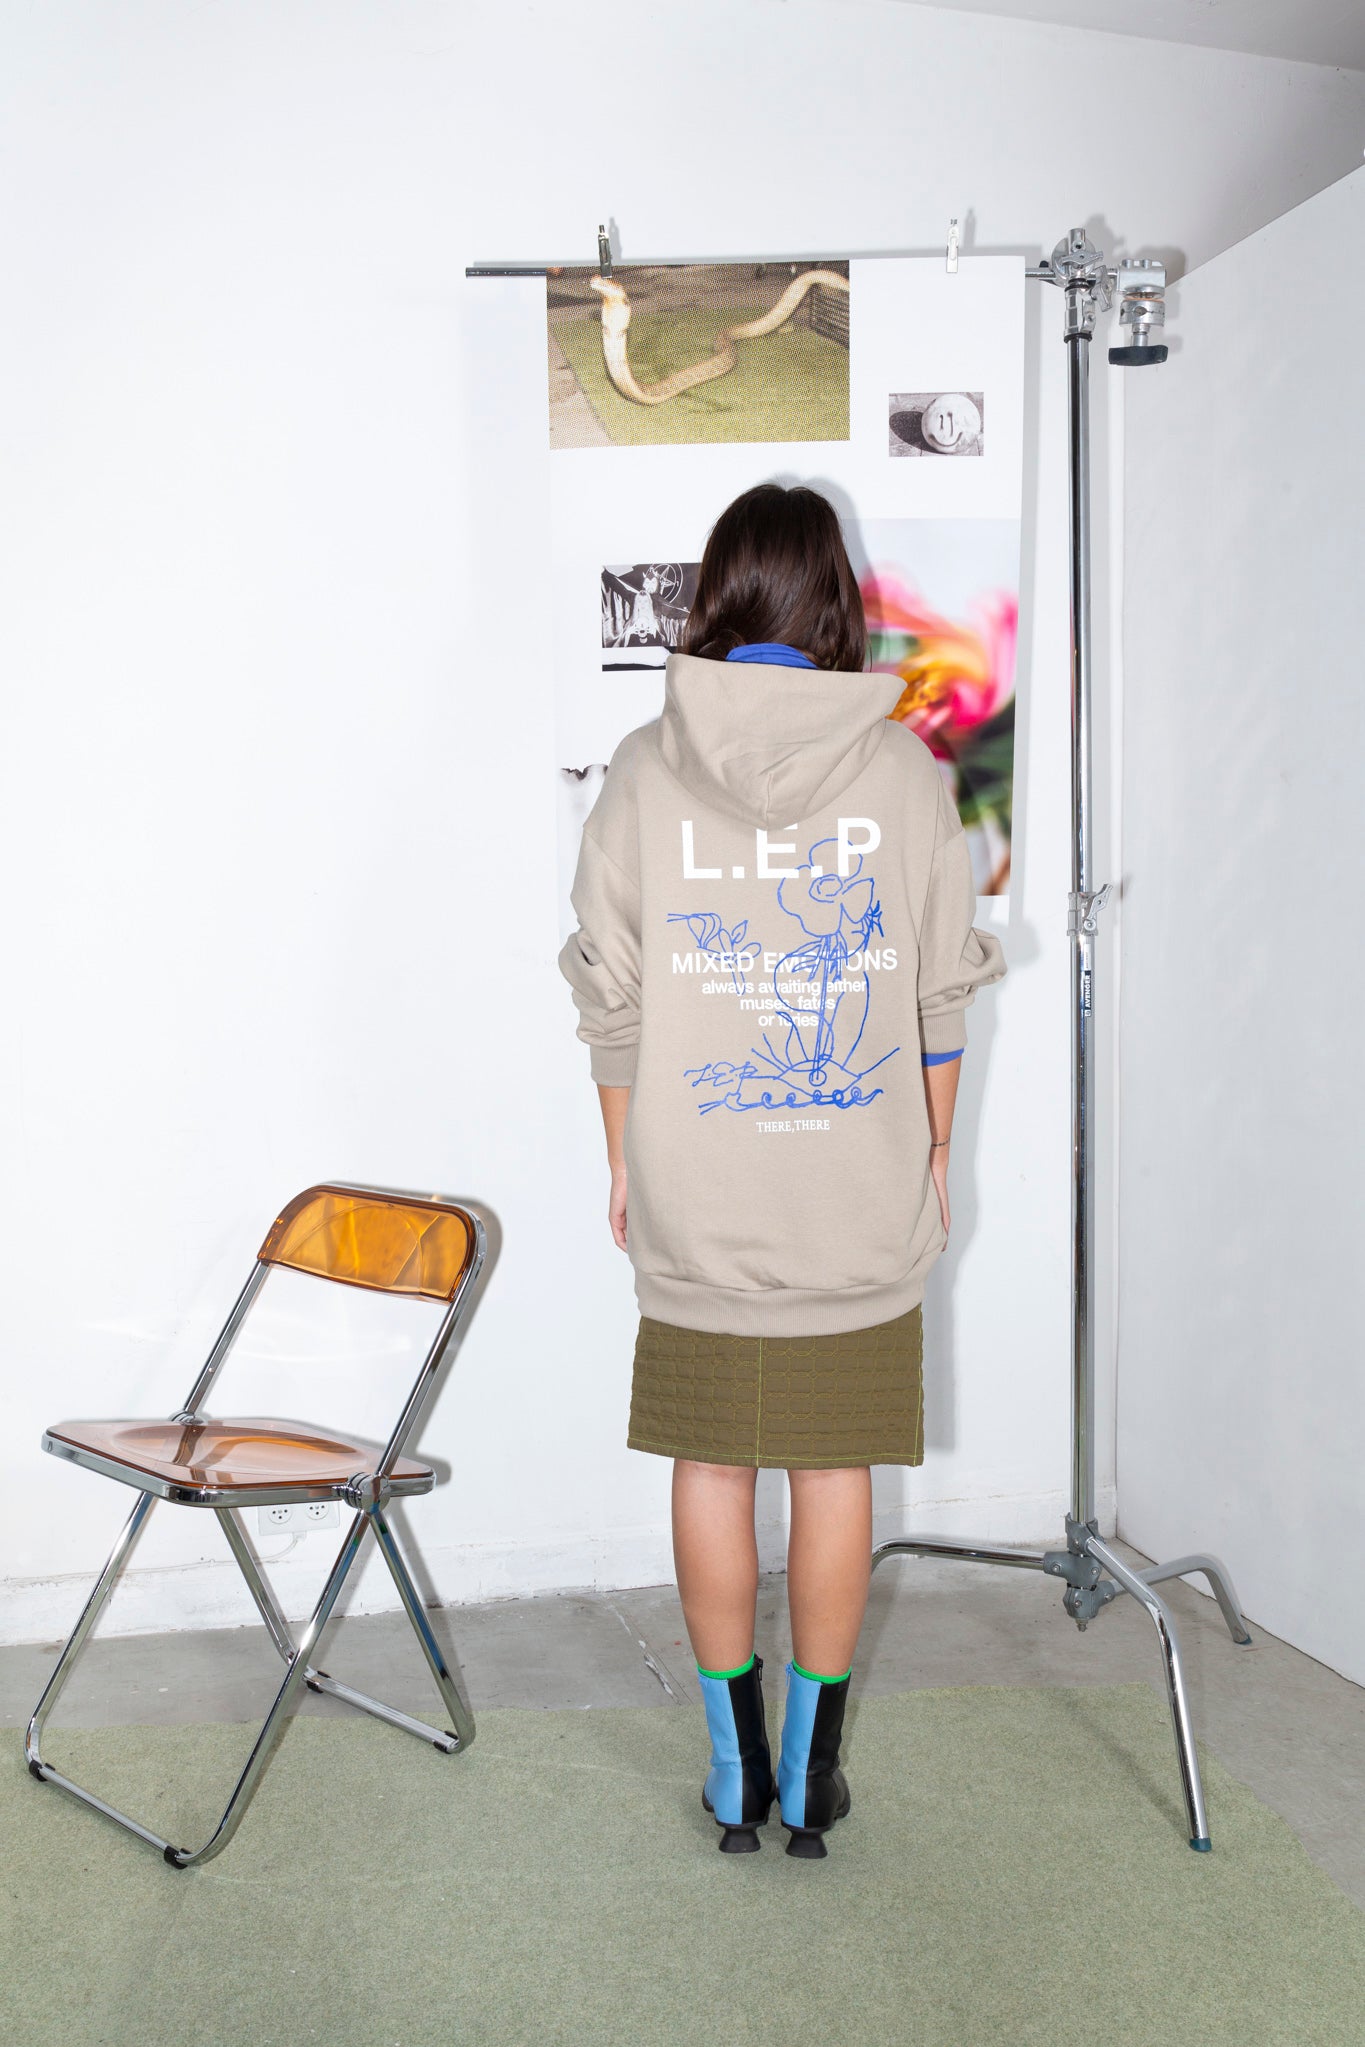 L.E.P mixed emotions Mocca hoodie